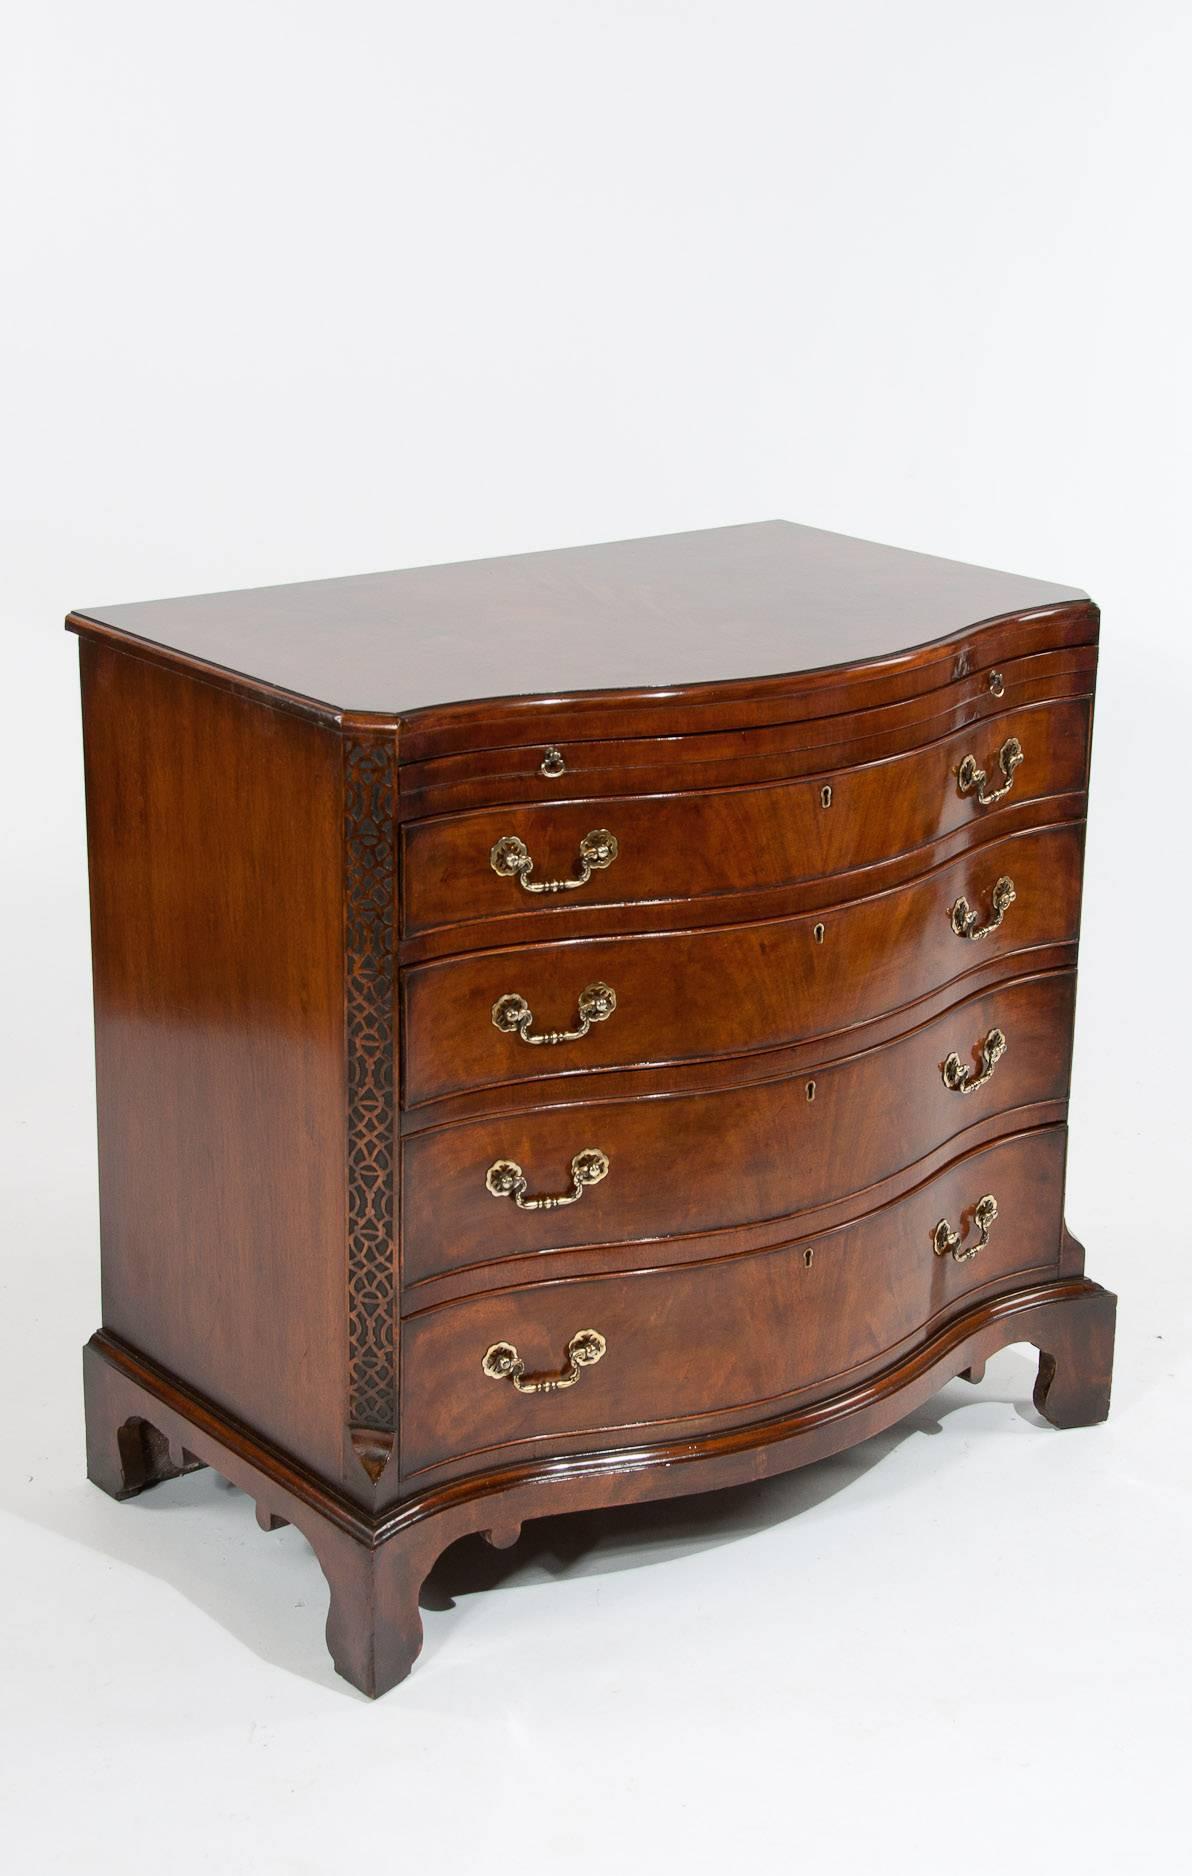 A fabulous quality antique mahogany serpentine chest of drawers dating to the 1900s. This superior quality and well-proportioned mahogany serpentine chest of drawers has a book matched veneered flame mahogany shaped top and cross banded boarder with